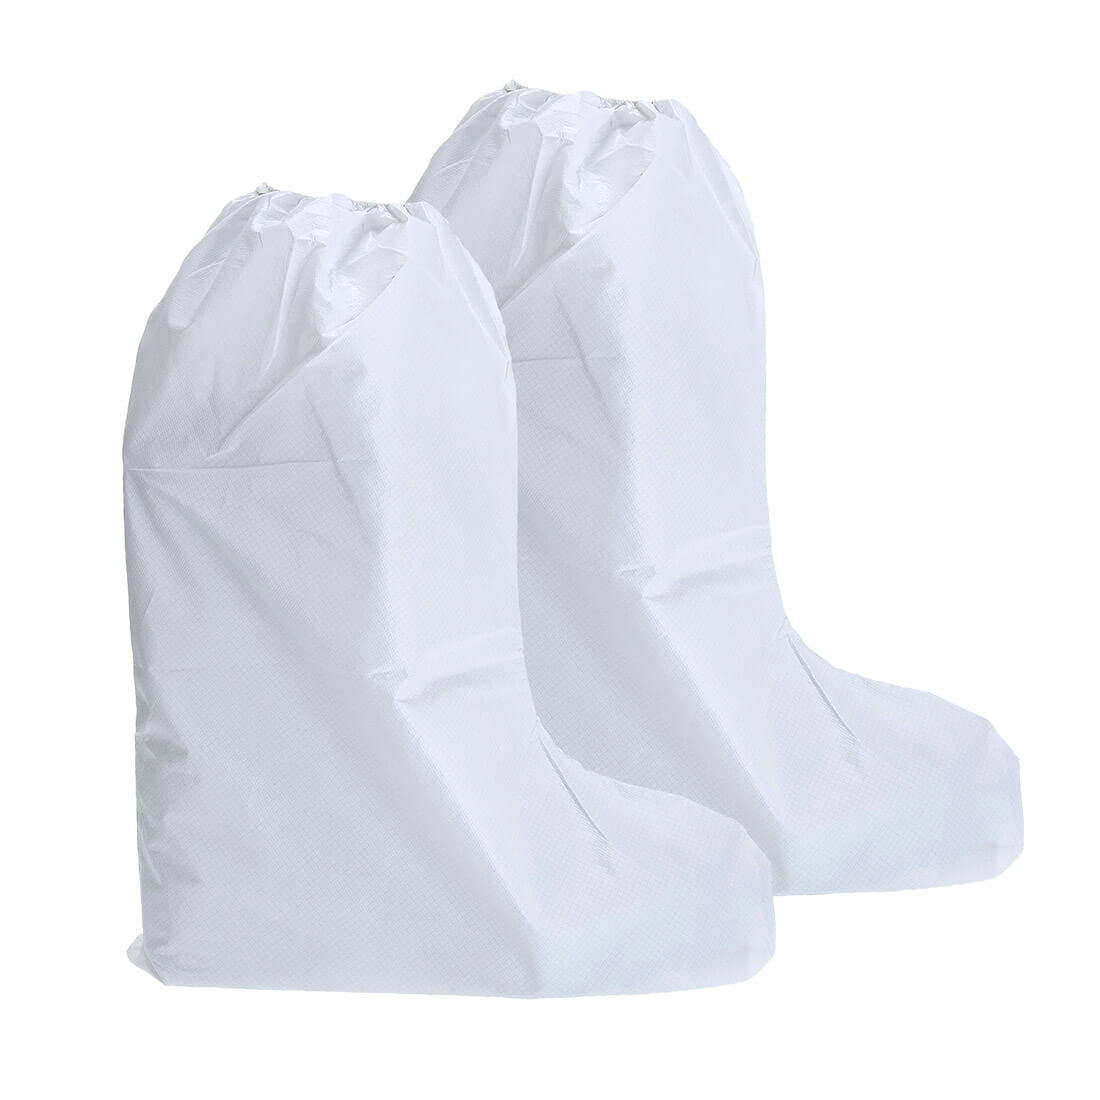 BizTex® Microporous Boot Cover Type 6PB - Personal protection